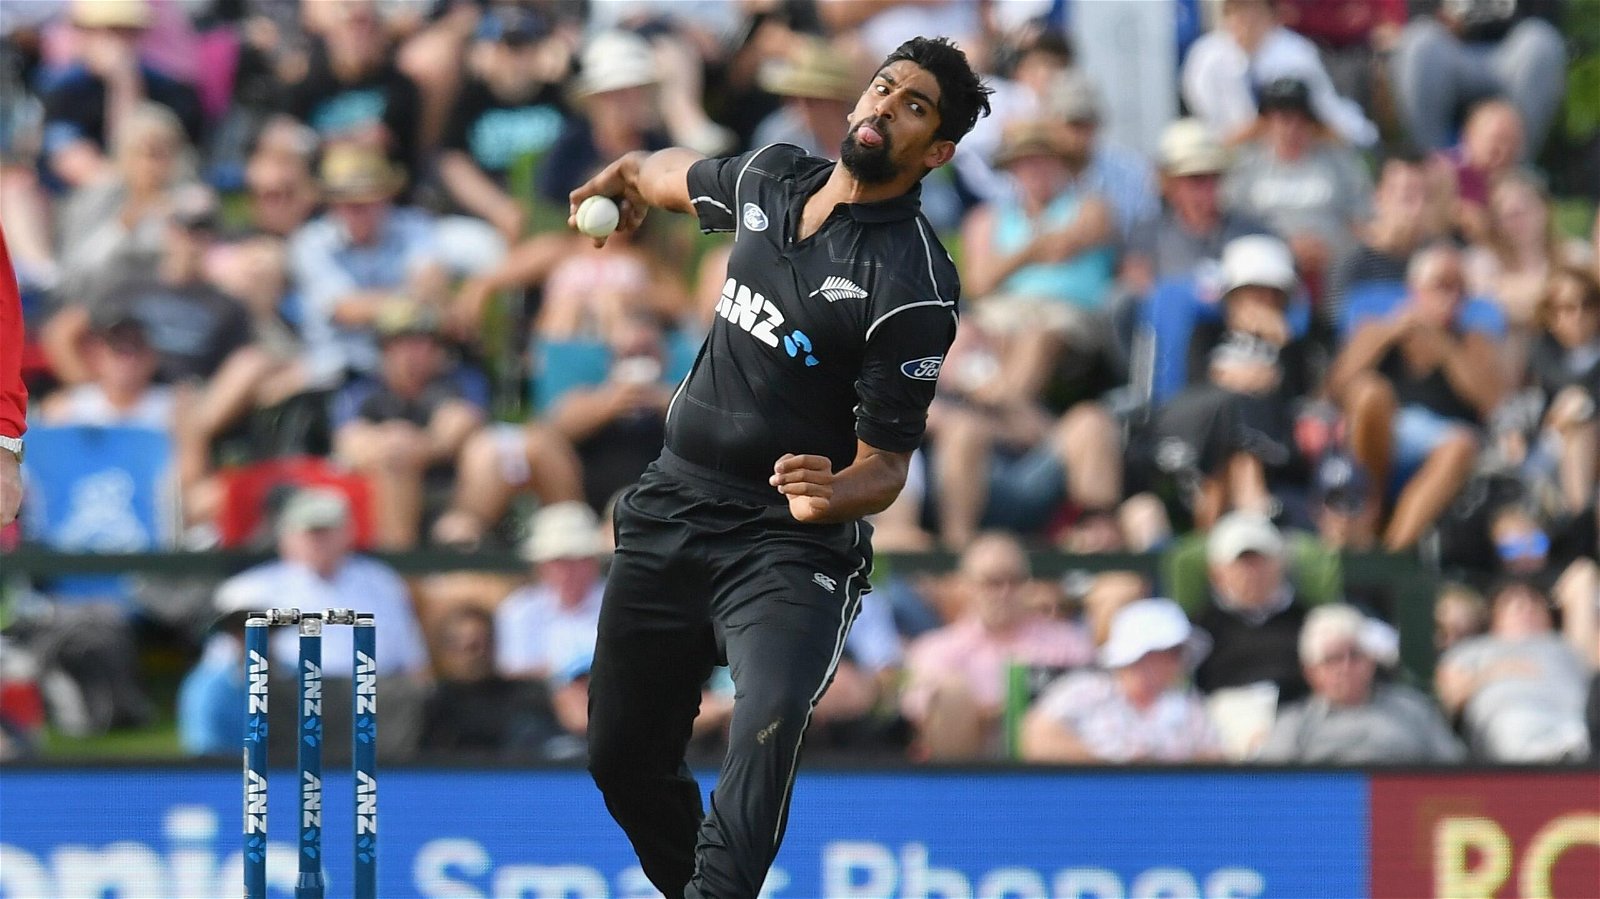 Ish Sodhi, T20 World Cup 2021